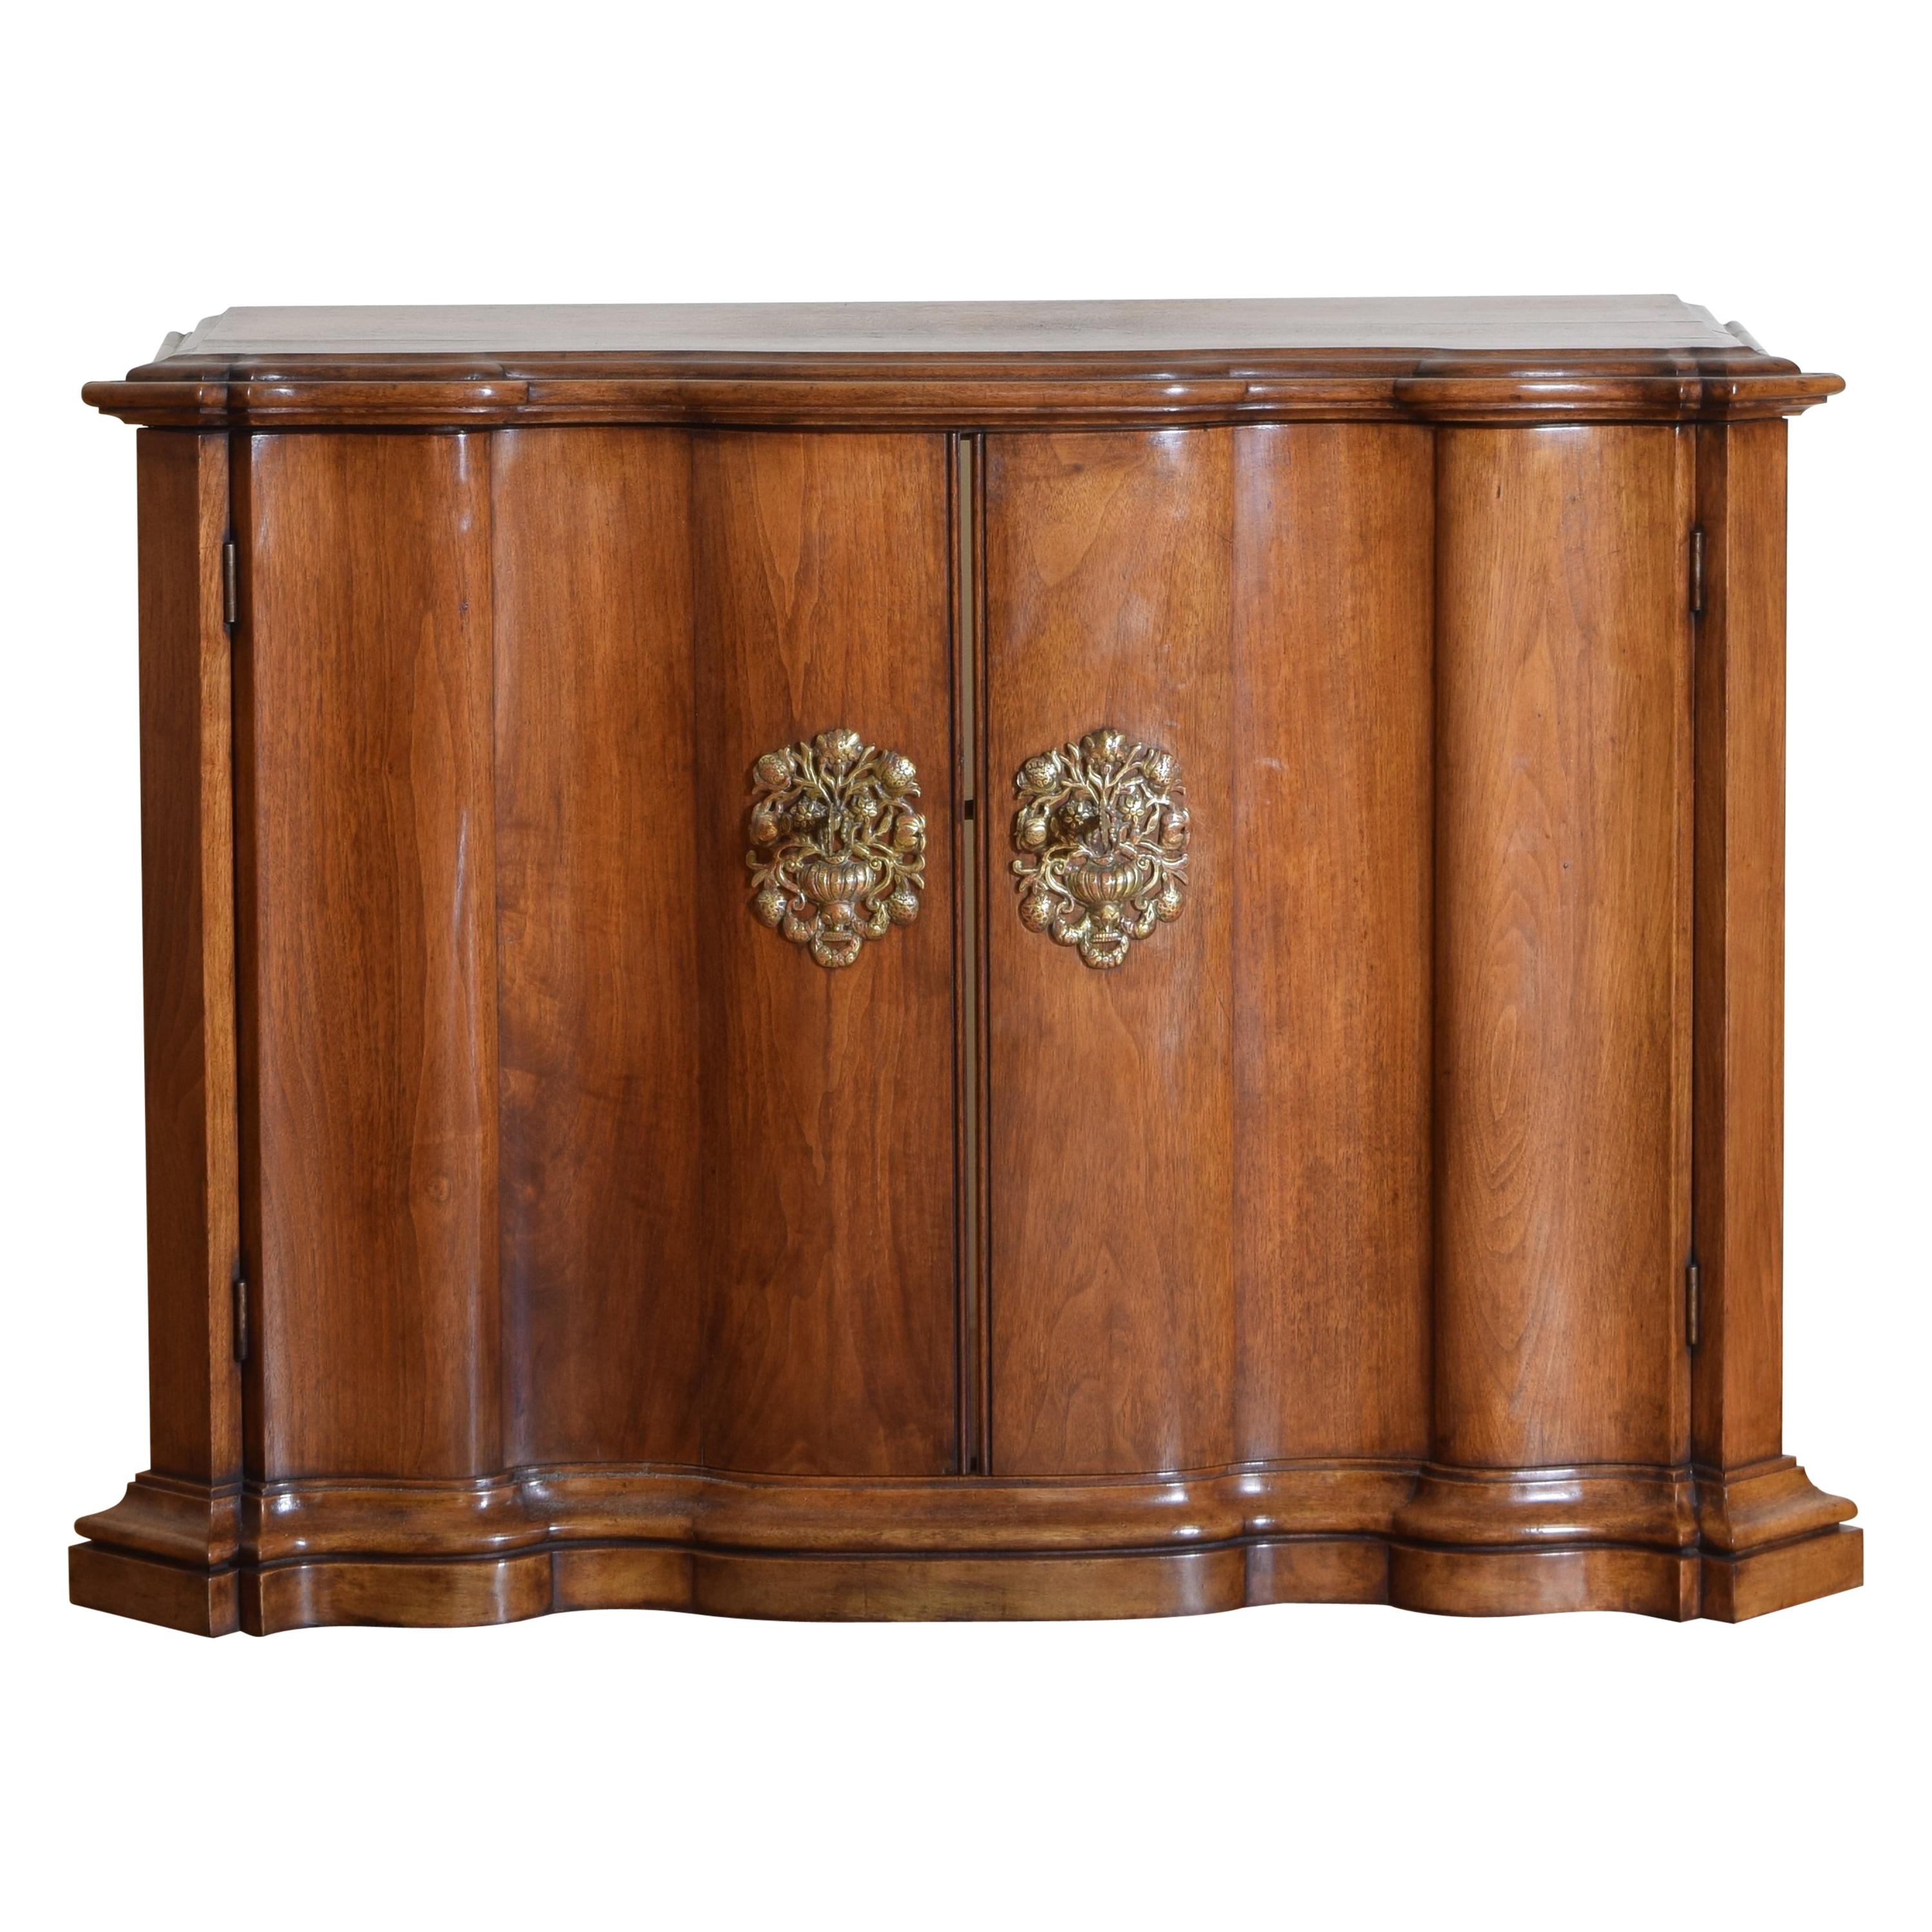 Continental Rococo Style Walnut Serpentine Front 2-Door Cabinet, Early 20th Cen